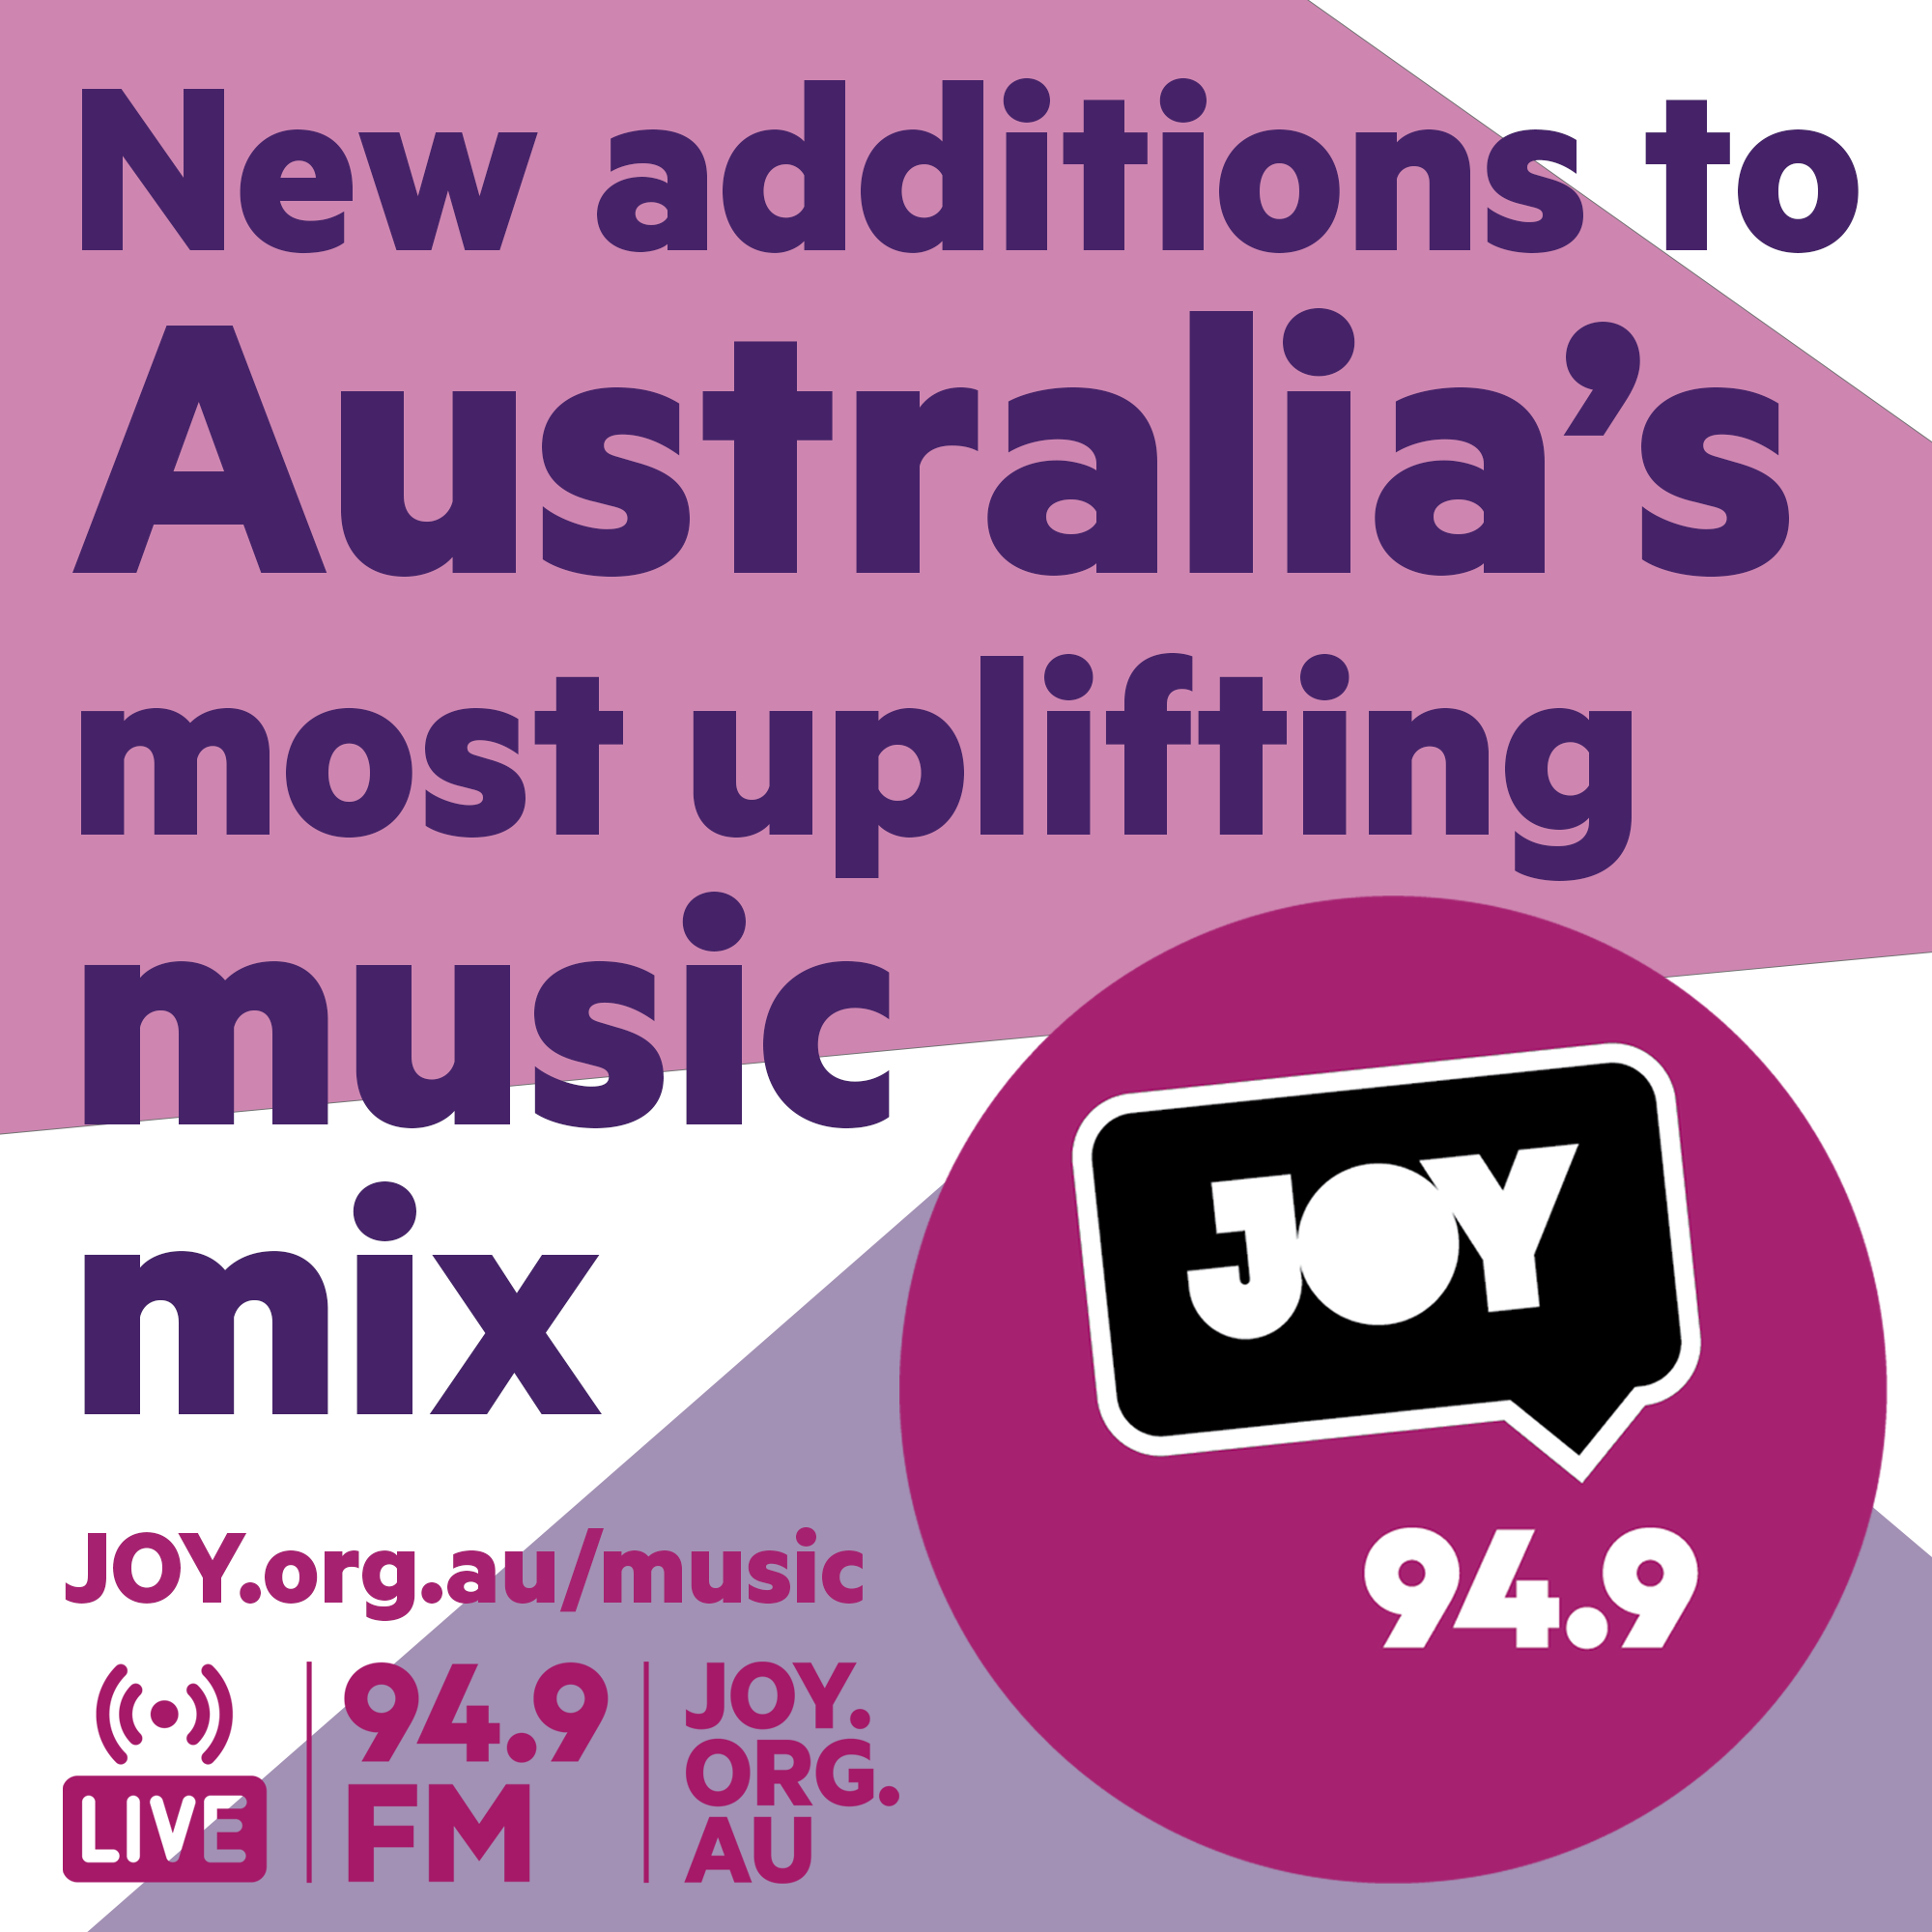 The newest songs to Australia’s most uplifting music mix: 6 April 2022